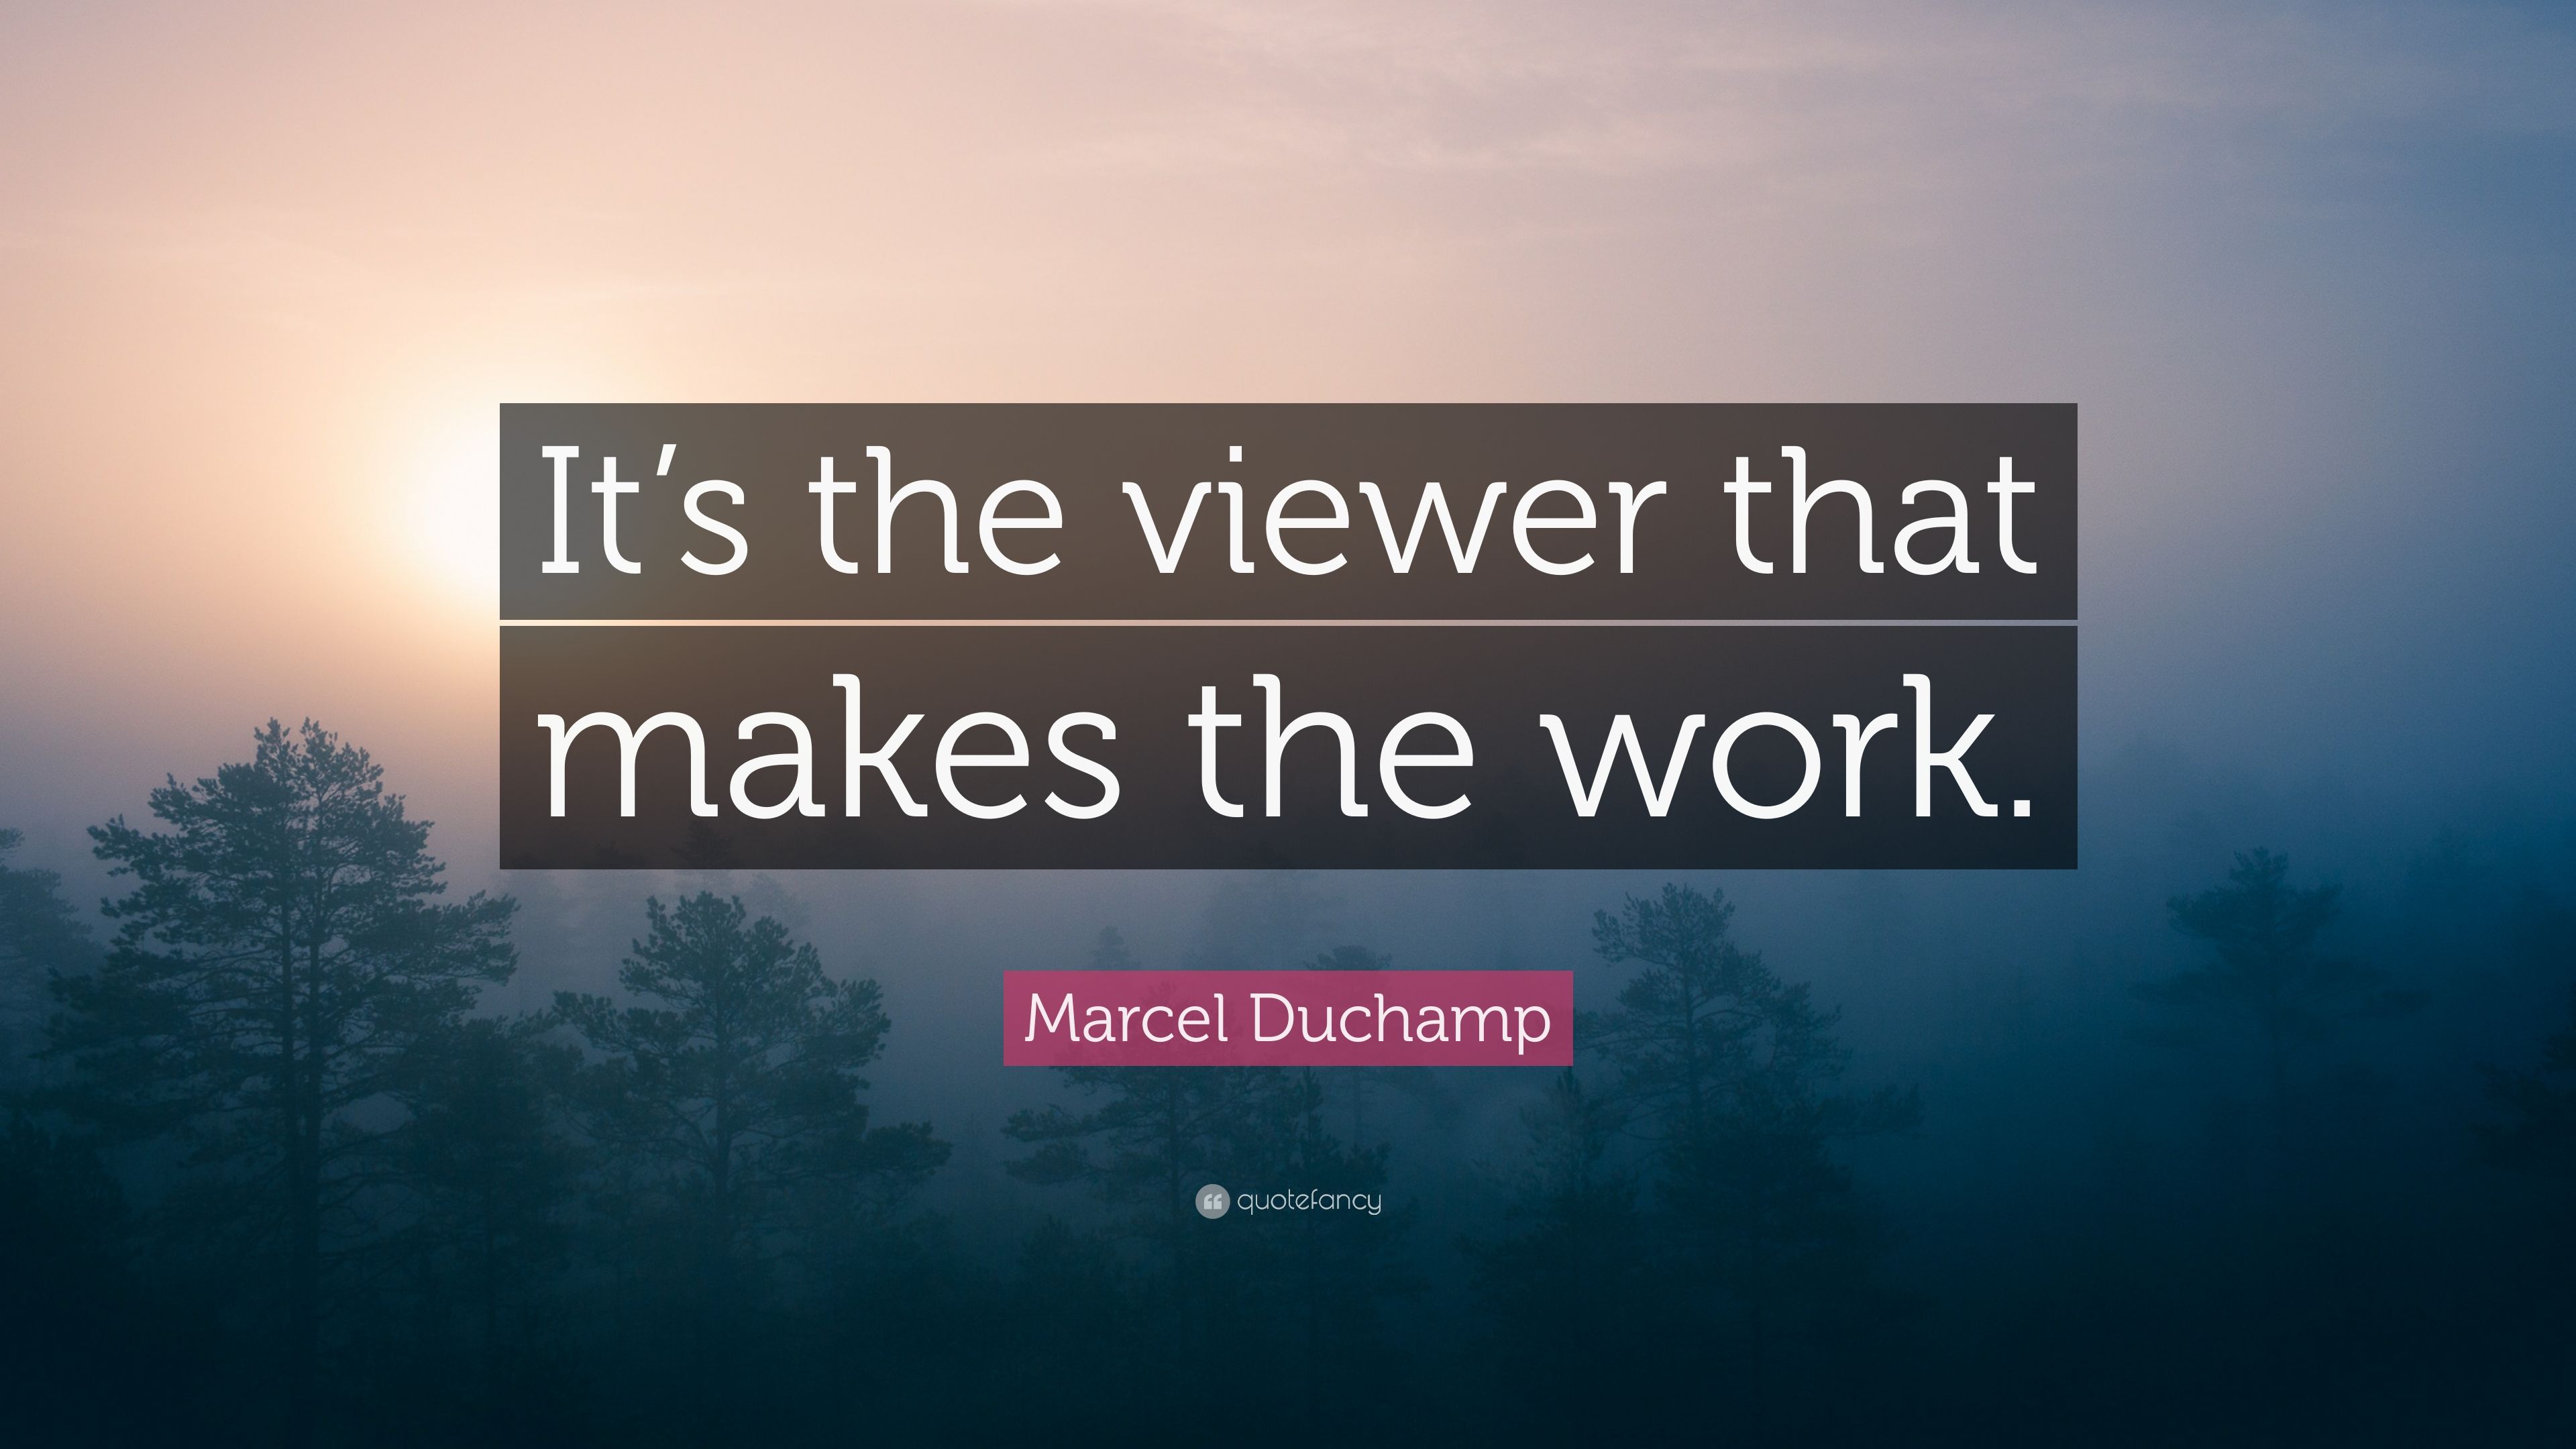 Marcel Duchamp Quote: “It's the viewer that makes the work.” 7